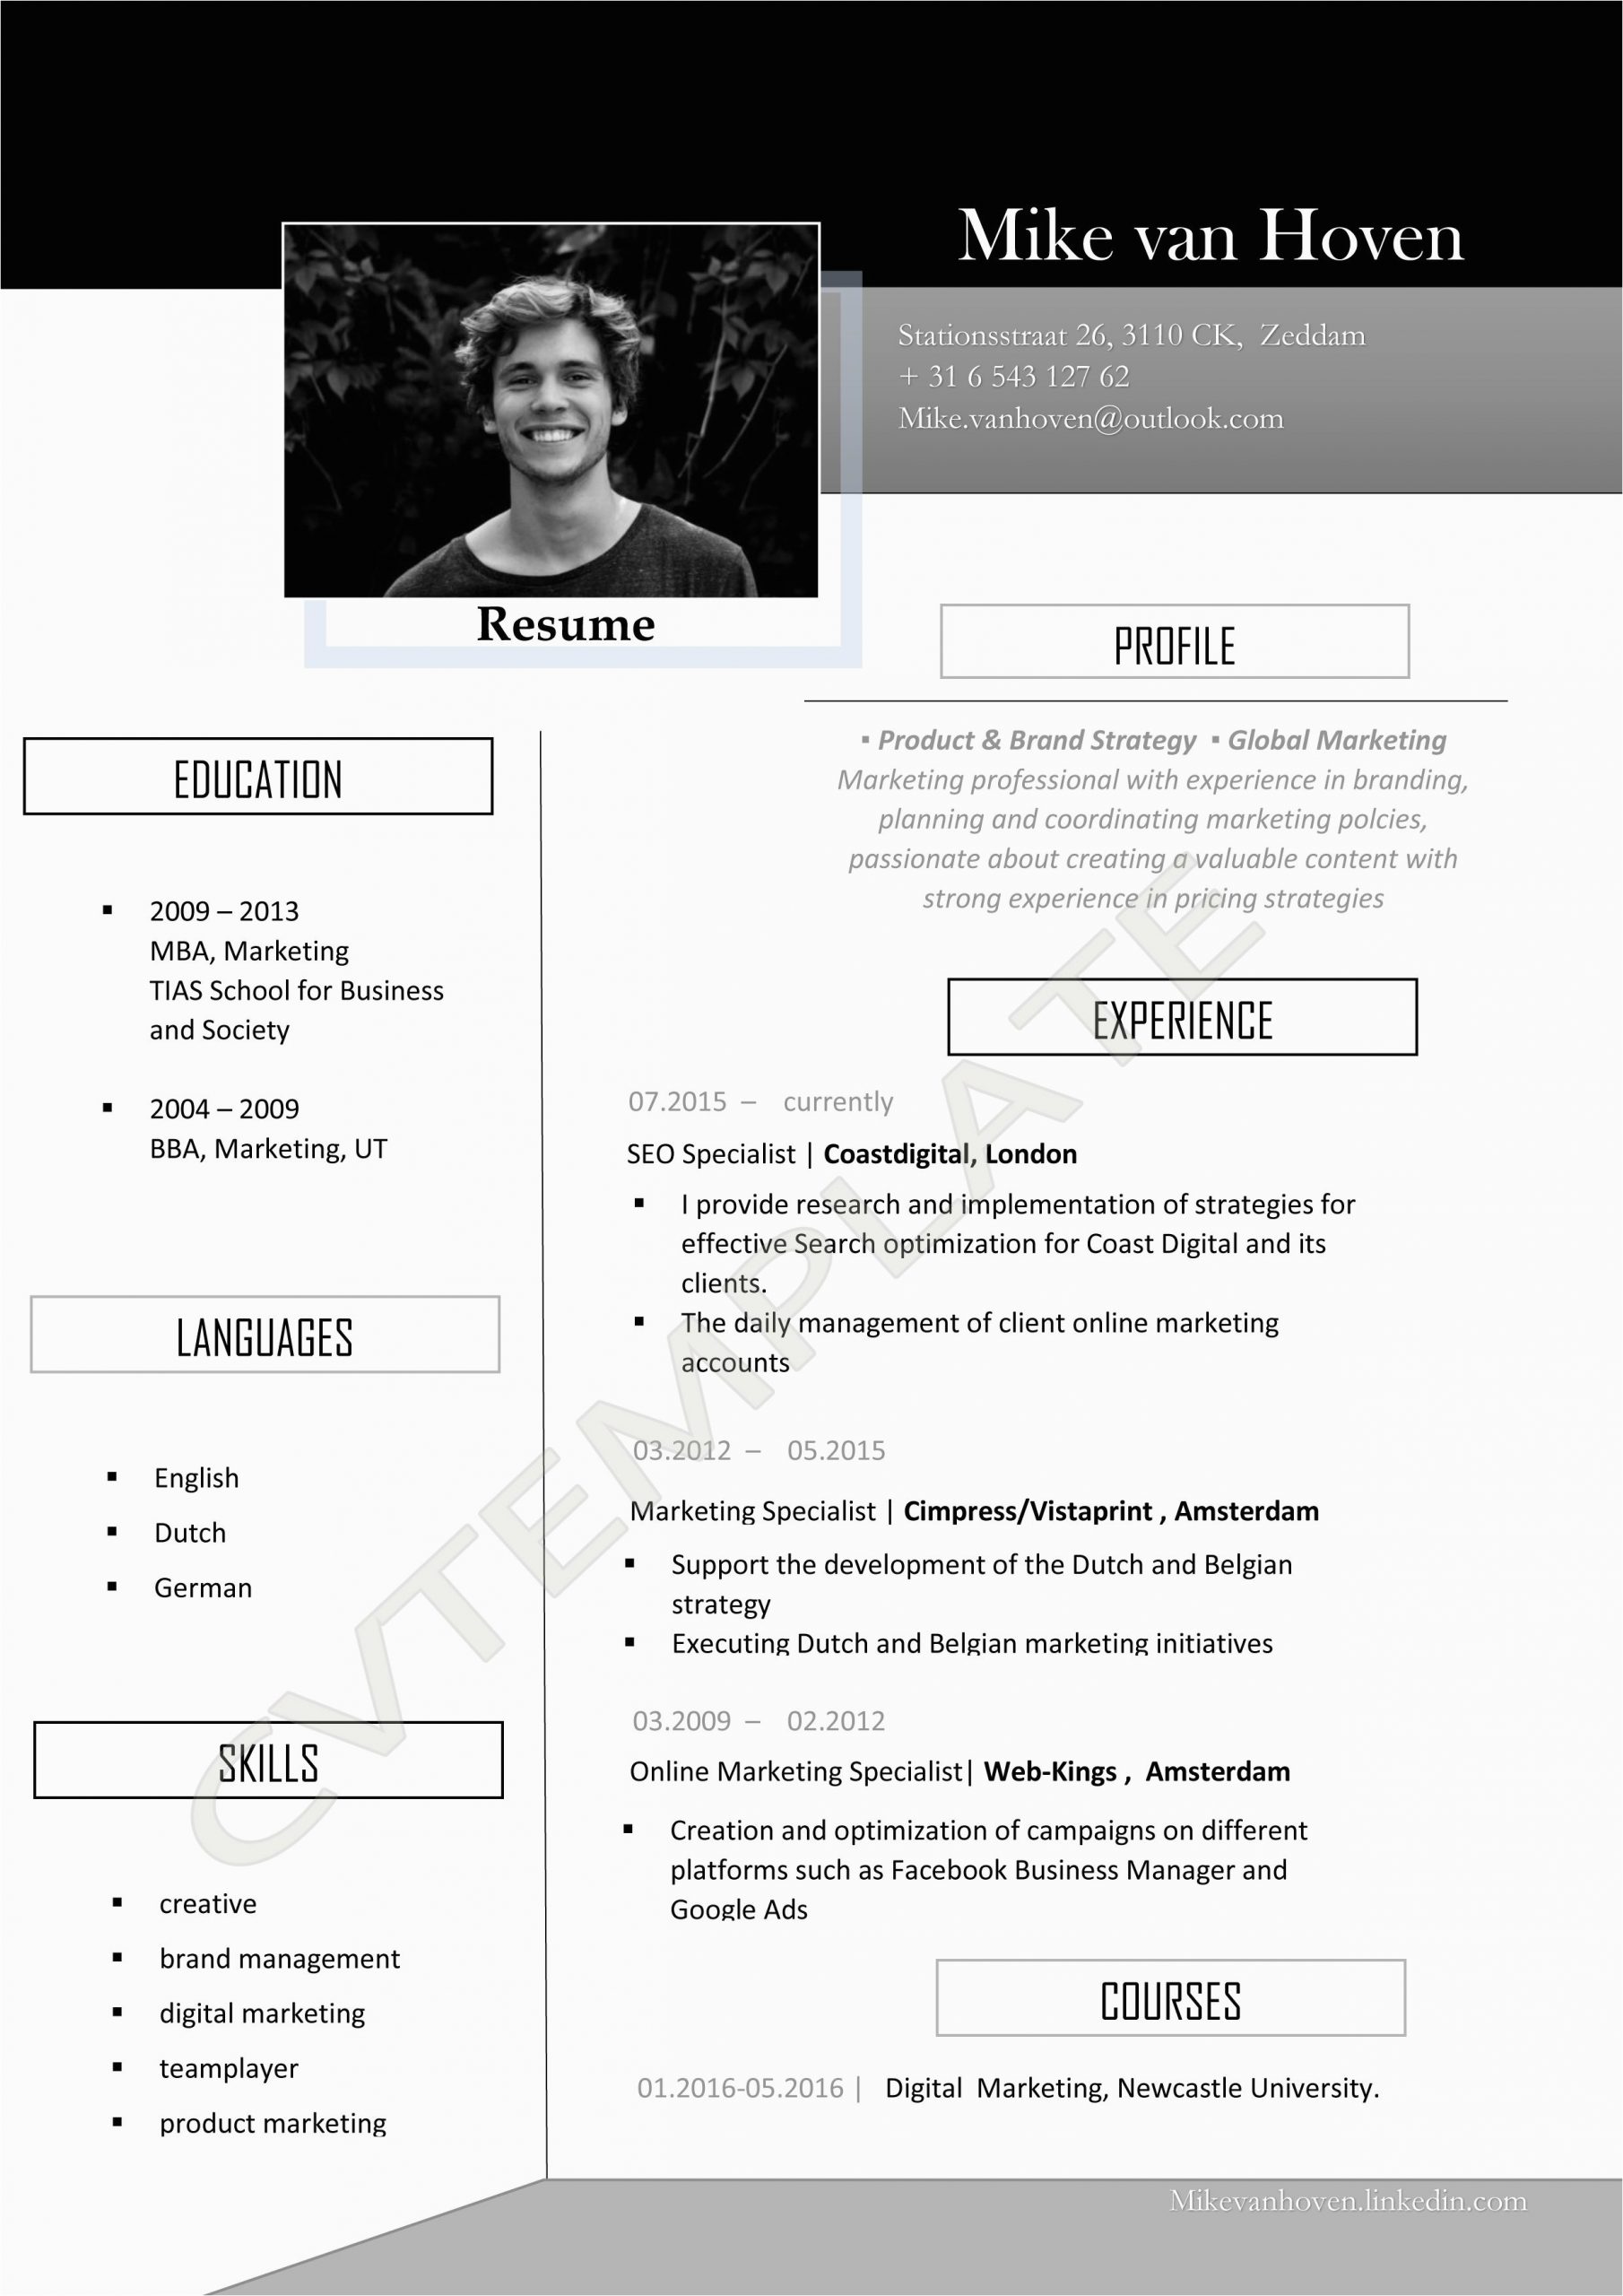 Create Your Own Resume Template Free Resume Editable Template On the Website